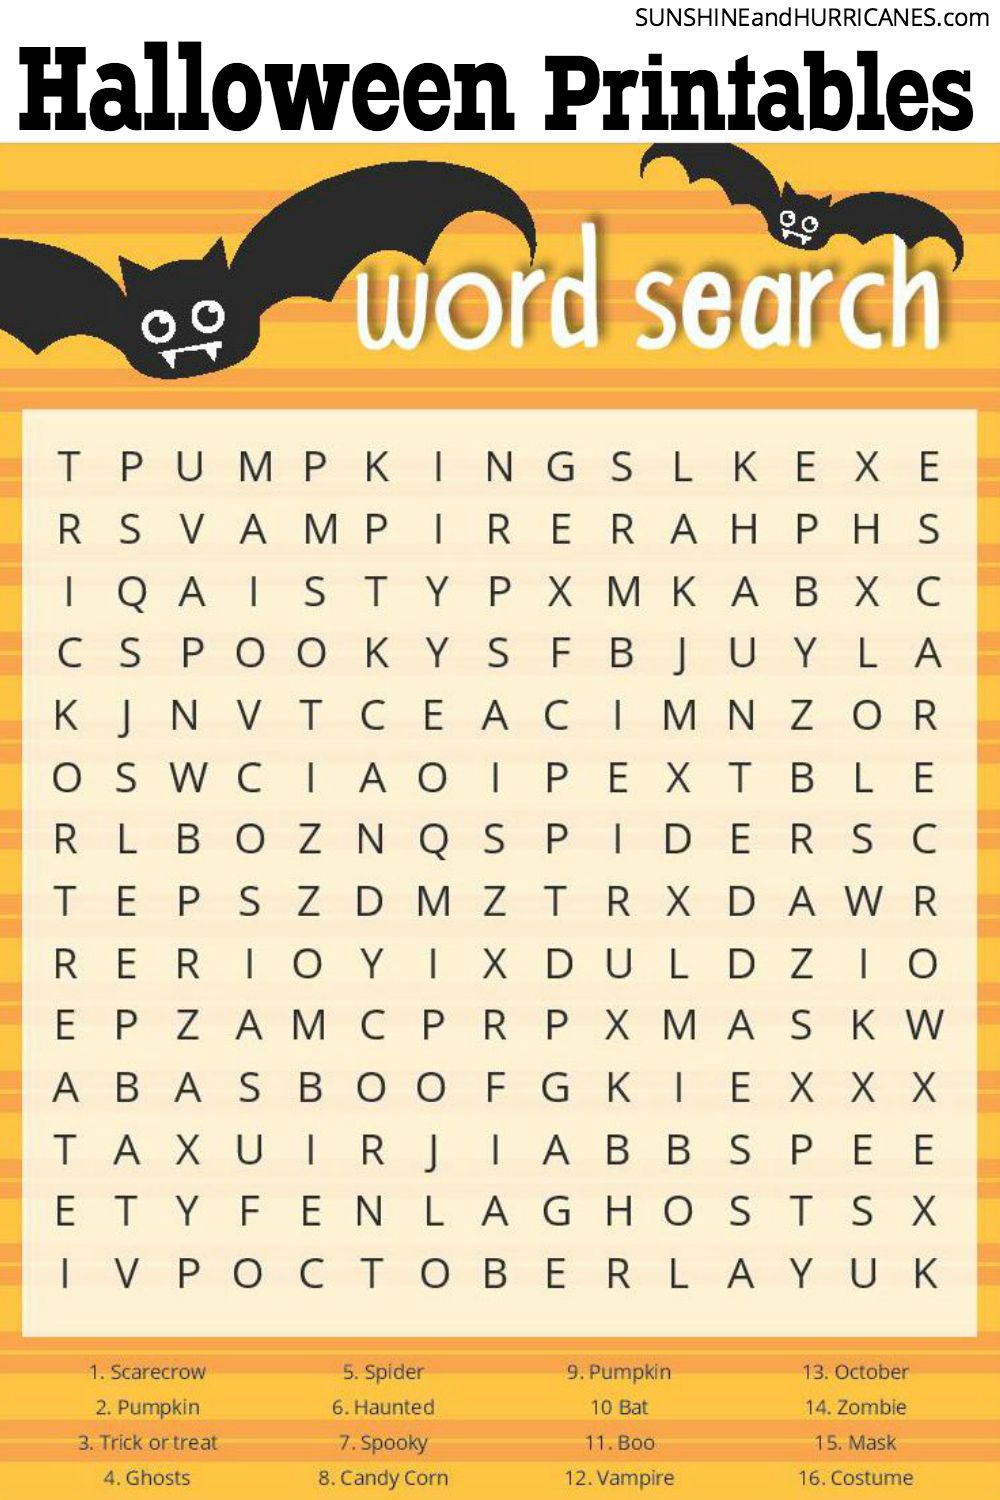 Printable Halloween games are a great way to keep little ghosts entertained at a Halloween school party or a neighborhood trick or treating get together? This Halloween word search is perfect for some not so scary fun! Halloween Printables Word Search. SunshineandHurricanes.com